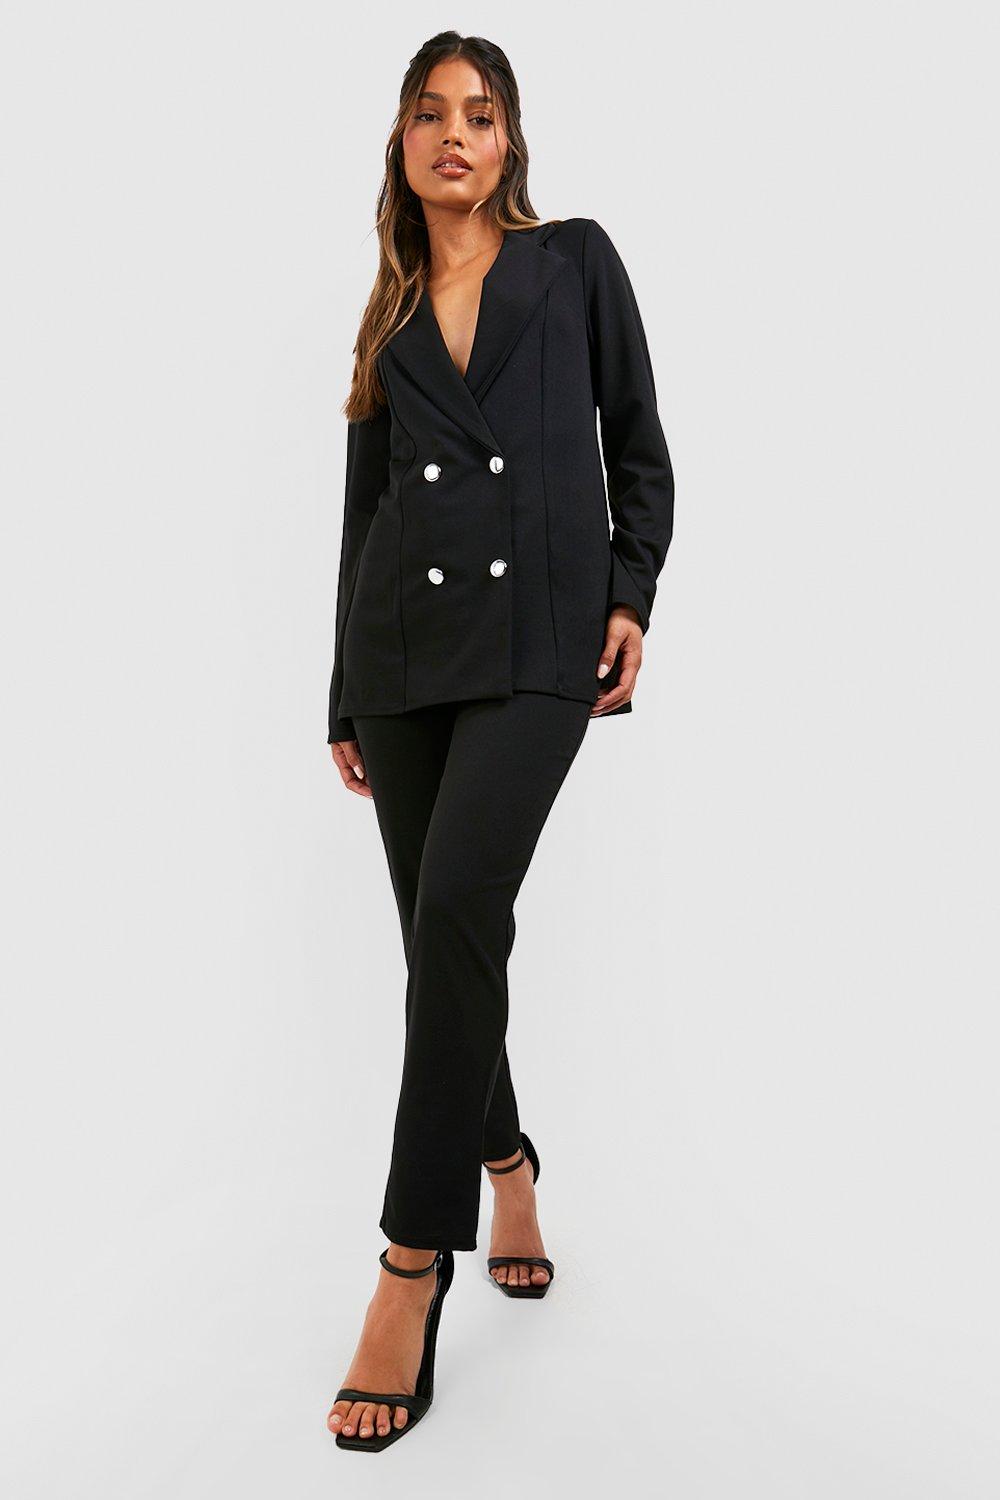 boohoo Women's Jersey Double Breasted Blazer And Trouser Suit Set|Size: 16|black